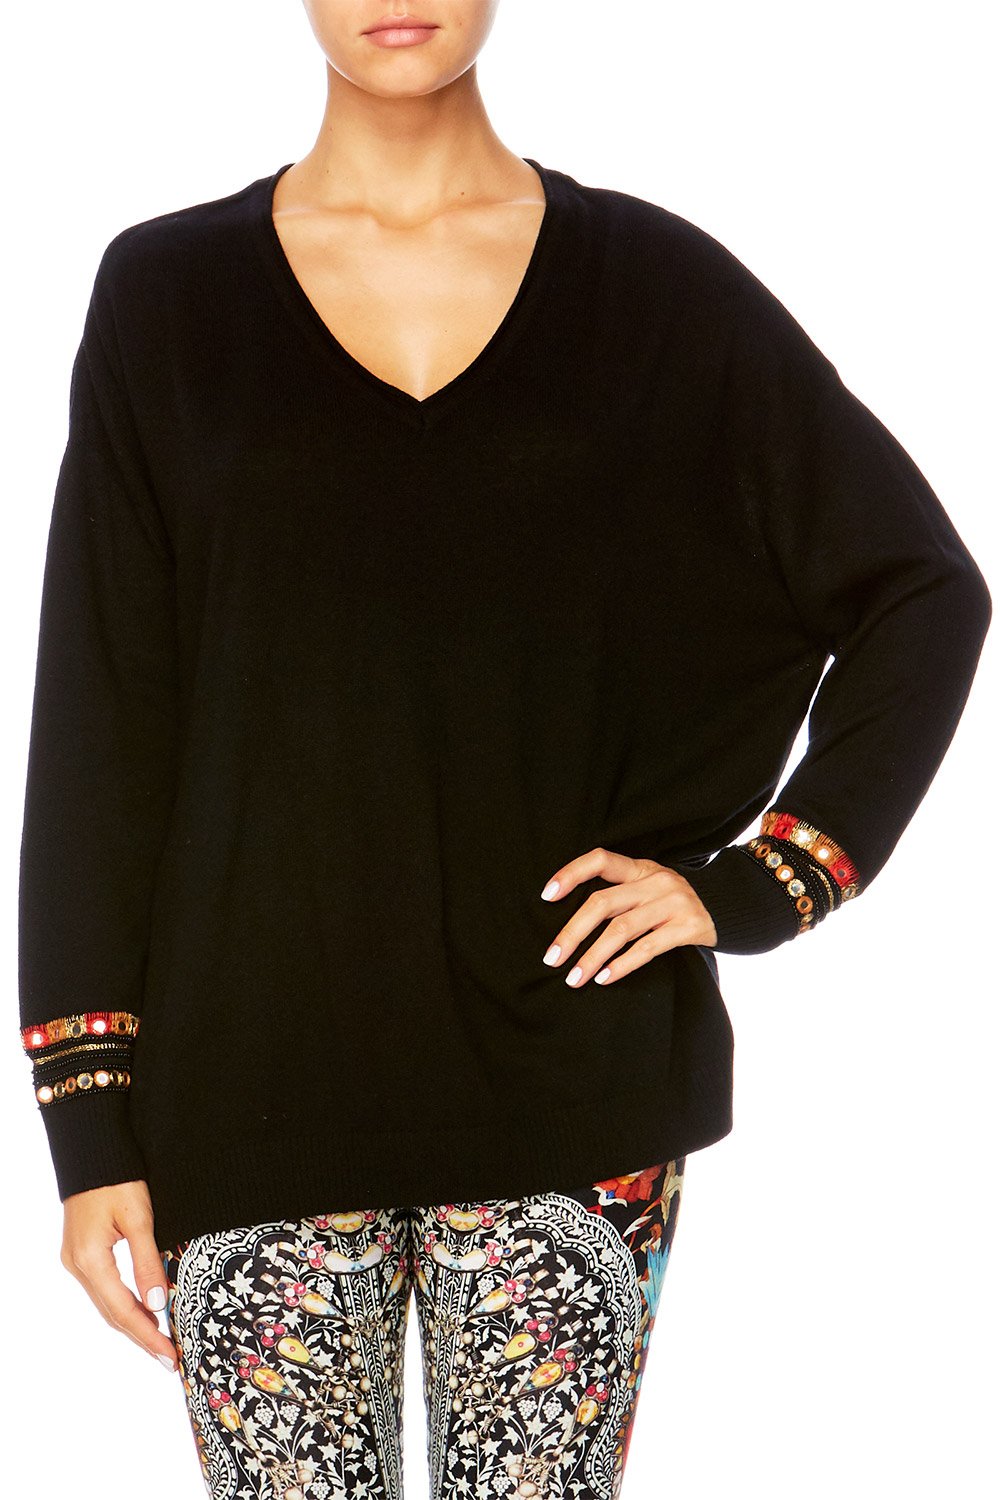 CHAMBER OF REFLECTIONS V-NECK LOOSE FIT JUMPER